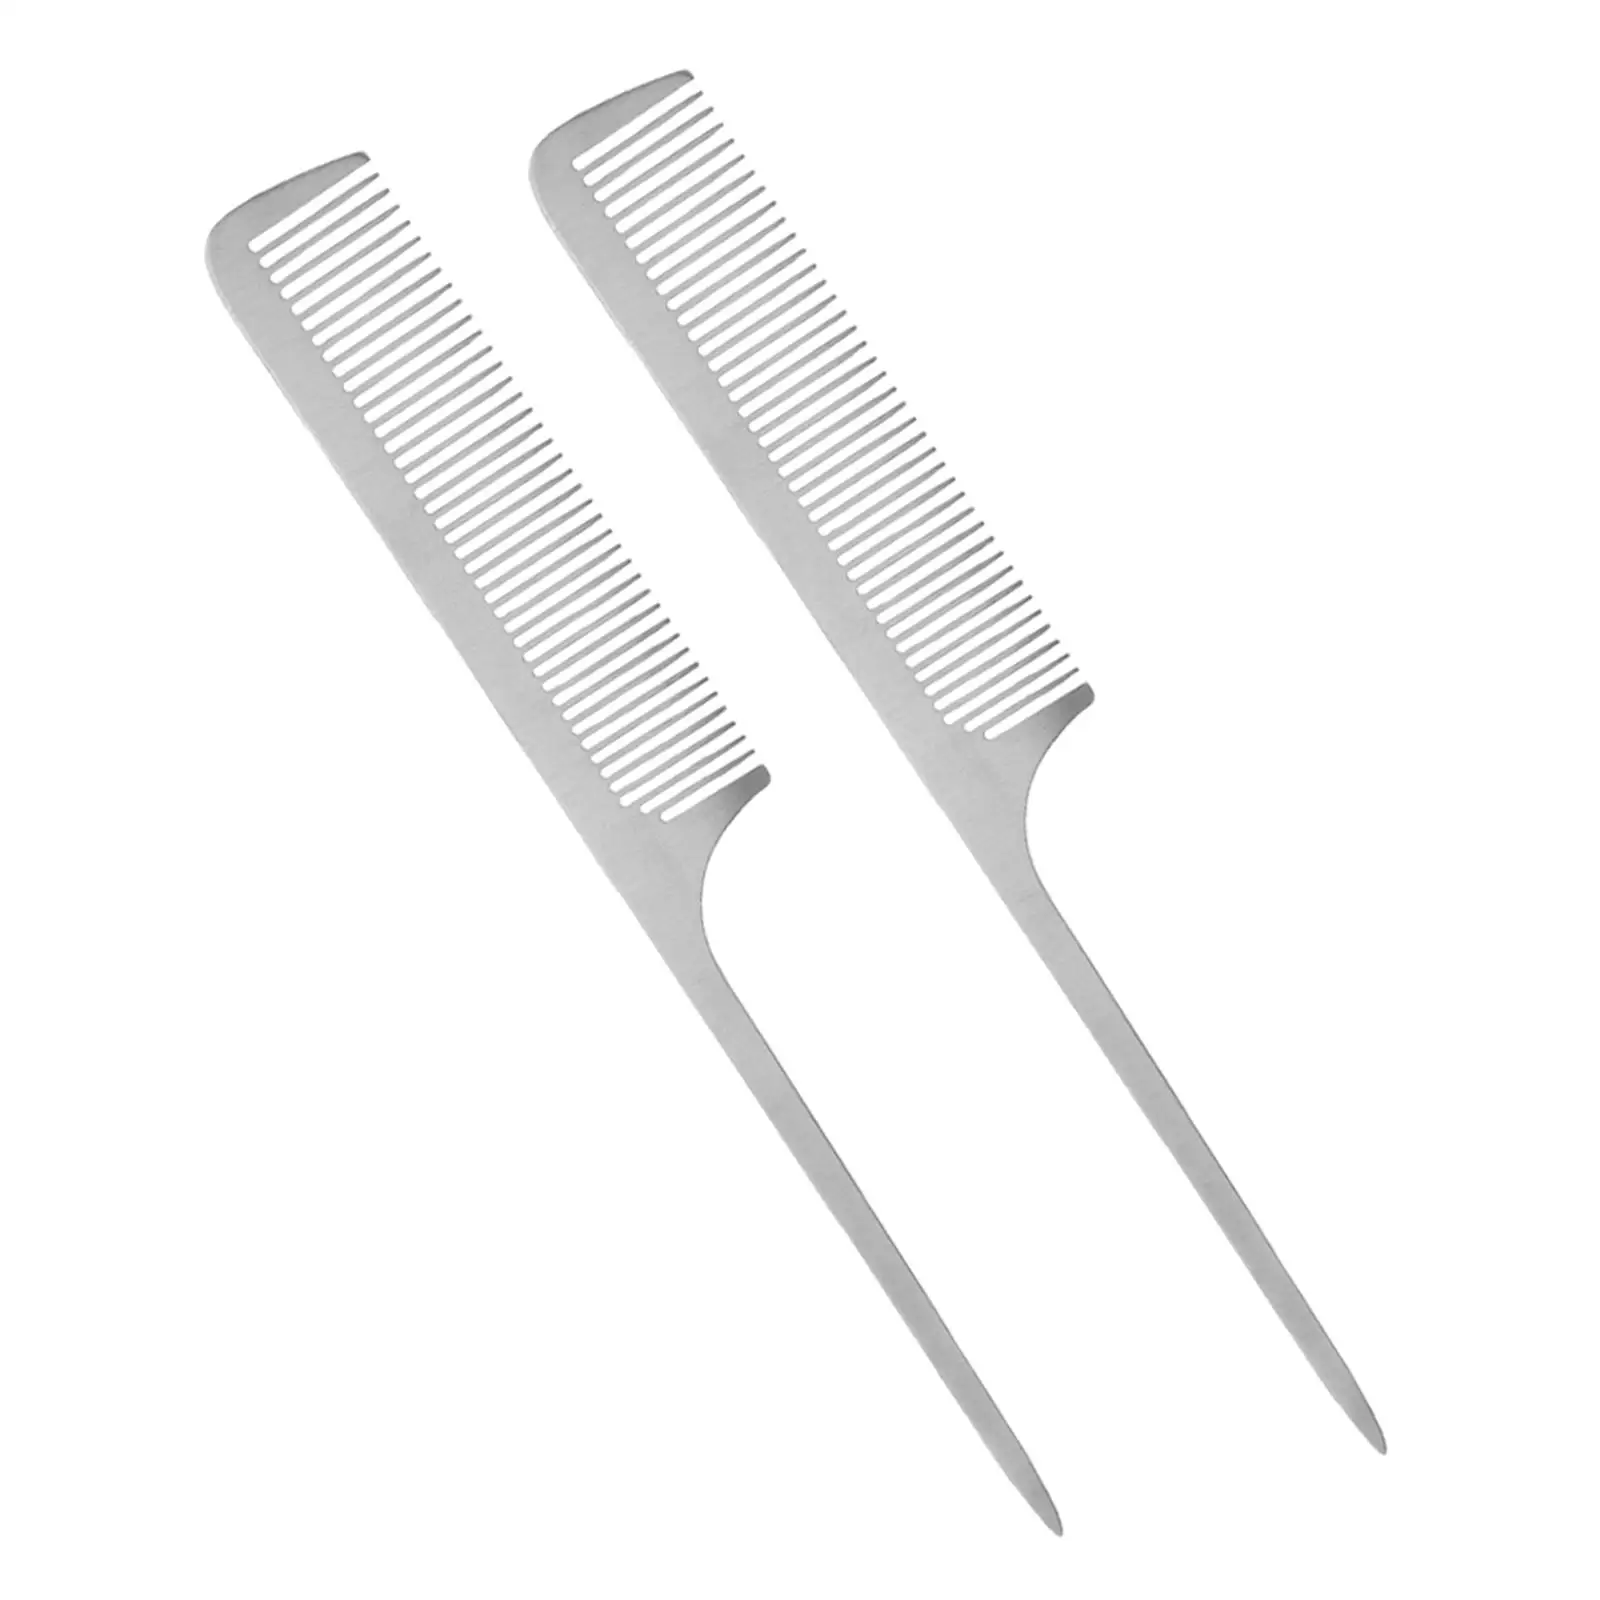 2x Stainless Steel Anti Static Comb Professional Hair Cut Tool Styling Brush,